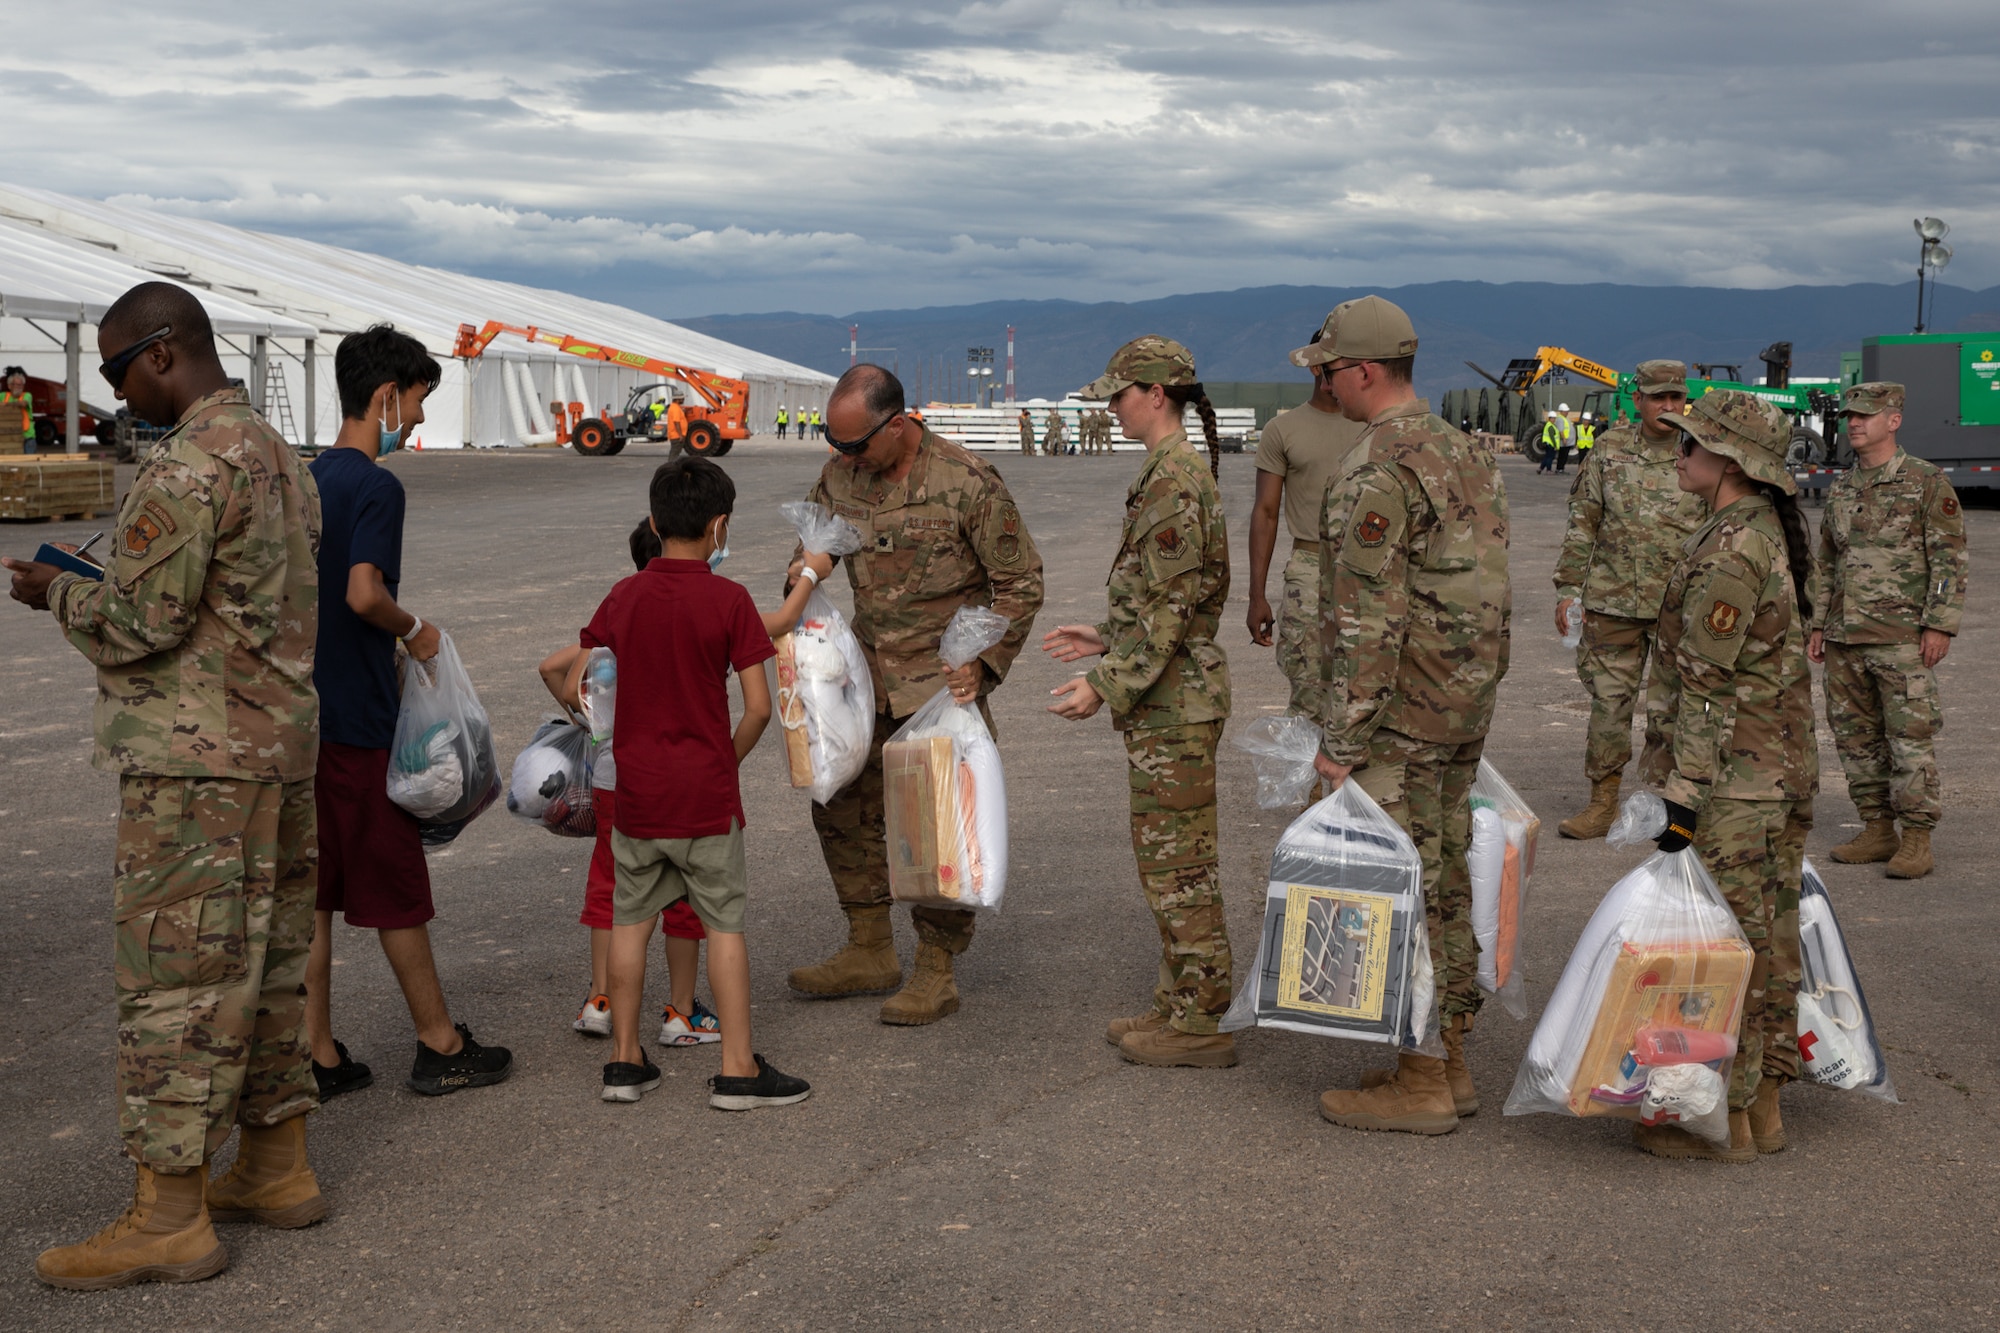 Airmen hand out basic essentials to arriving Afghan personnel as part of Operation Allies Welcome on Holloman Airforce Base Sept. 2, 2021. The Department of Defense, in support of the Depart of State, is providing transportation and temporary housing in support of Operation Allies Welcome. This initiative follows through on America’s commitment to Afghan citizens who have helped the United States, and provides them essential support at secure locations outside Afghanistan. (U.S. Army photo by Spc. Nicholas Goodman)